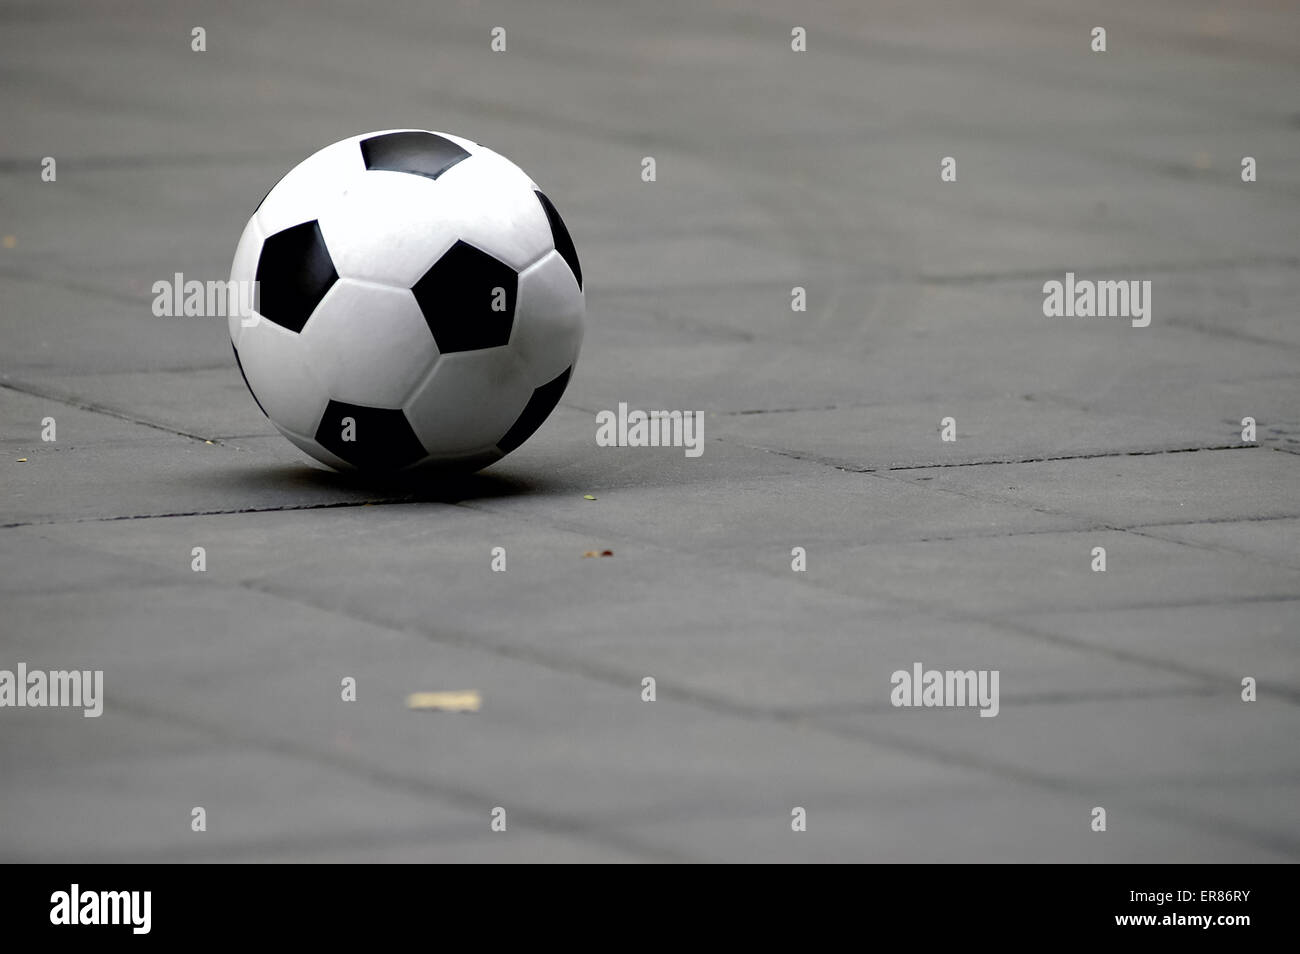 Generic football soccer ball laying on a ground Stock Photo